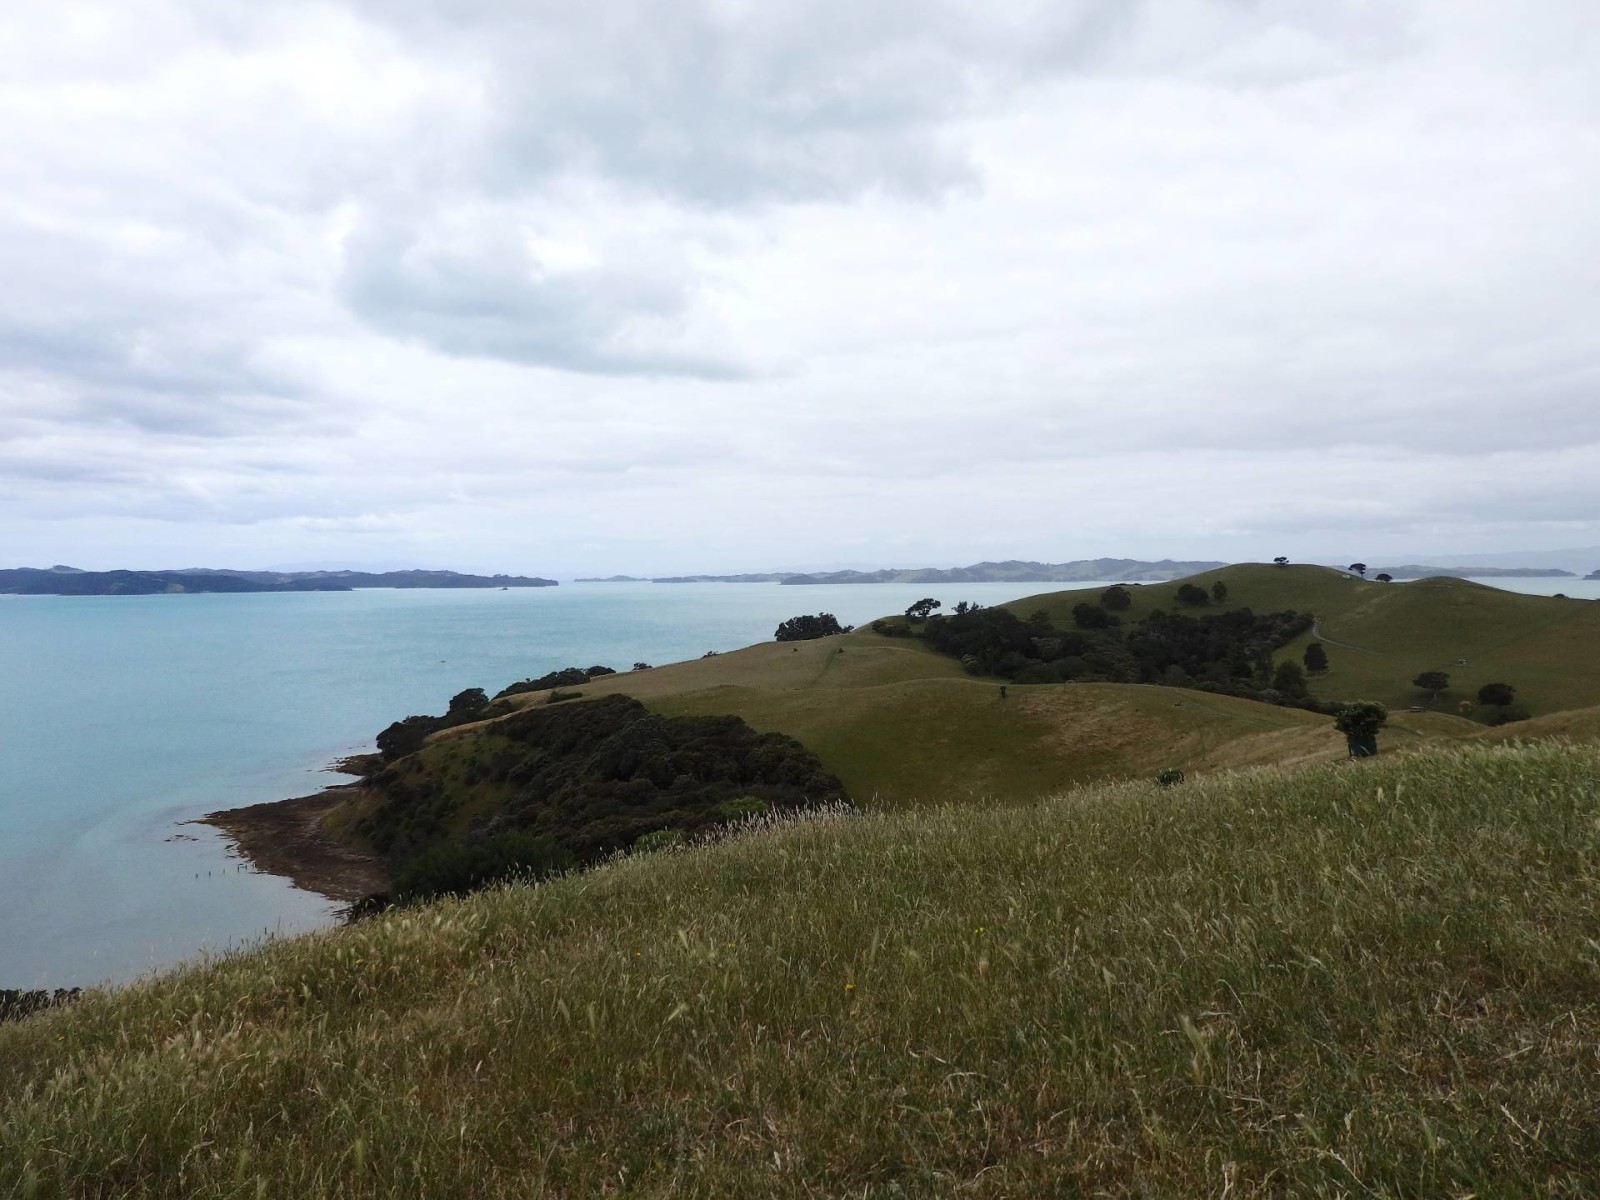 New Zealand Travel InspirationLooking for things to do in Auckland City then why not visit the Duder Regional Park in South Auckland which is a super little New Zealand hiking spot with stunning views over the Auckland Gulf. Add this Regional Park to your New Zealand Bucket List. Click on the link to see more photos and travel tips for Auckland, New Zealand.